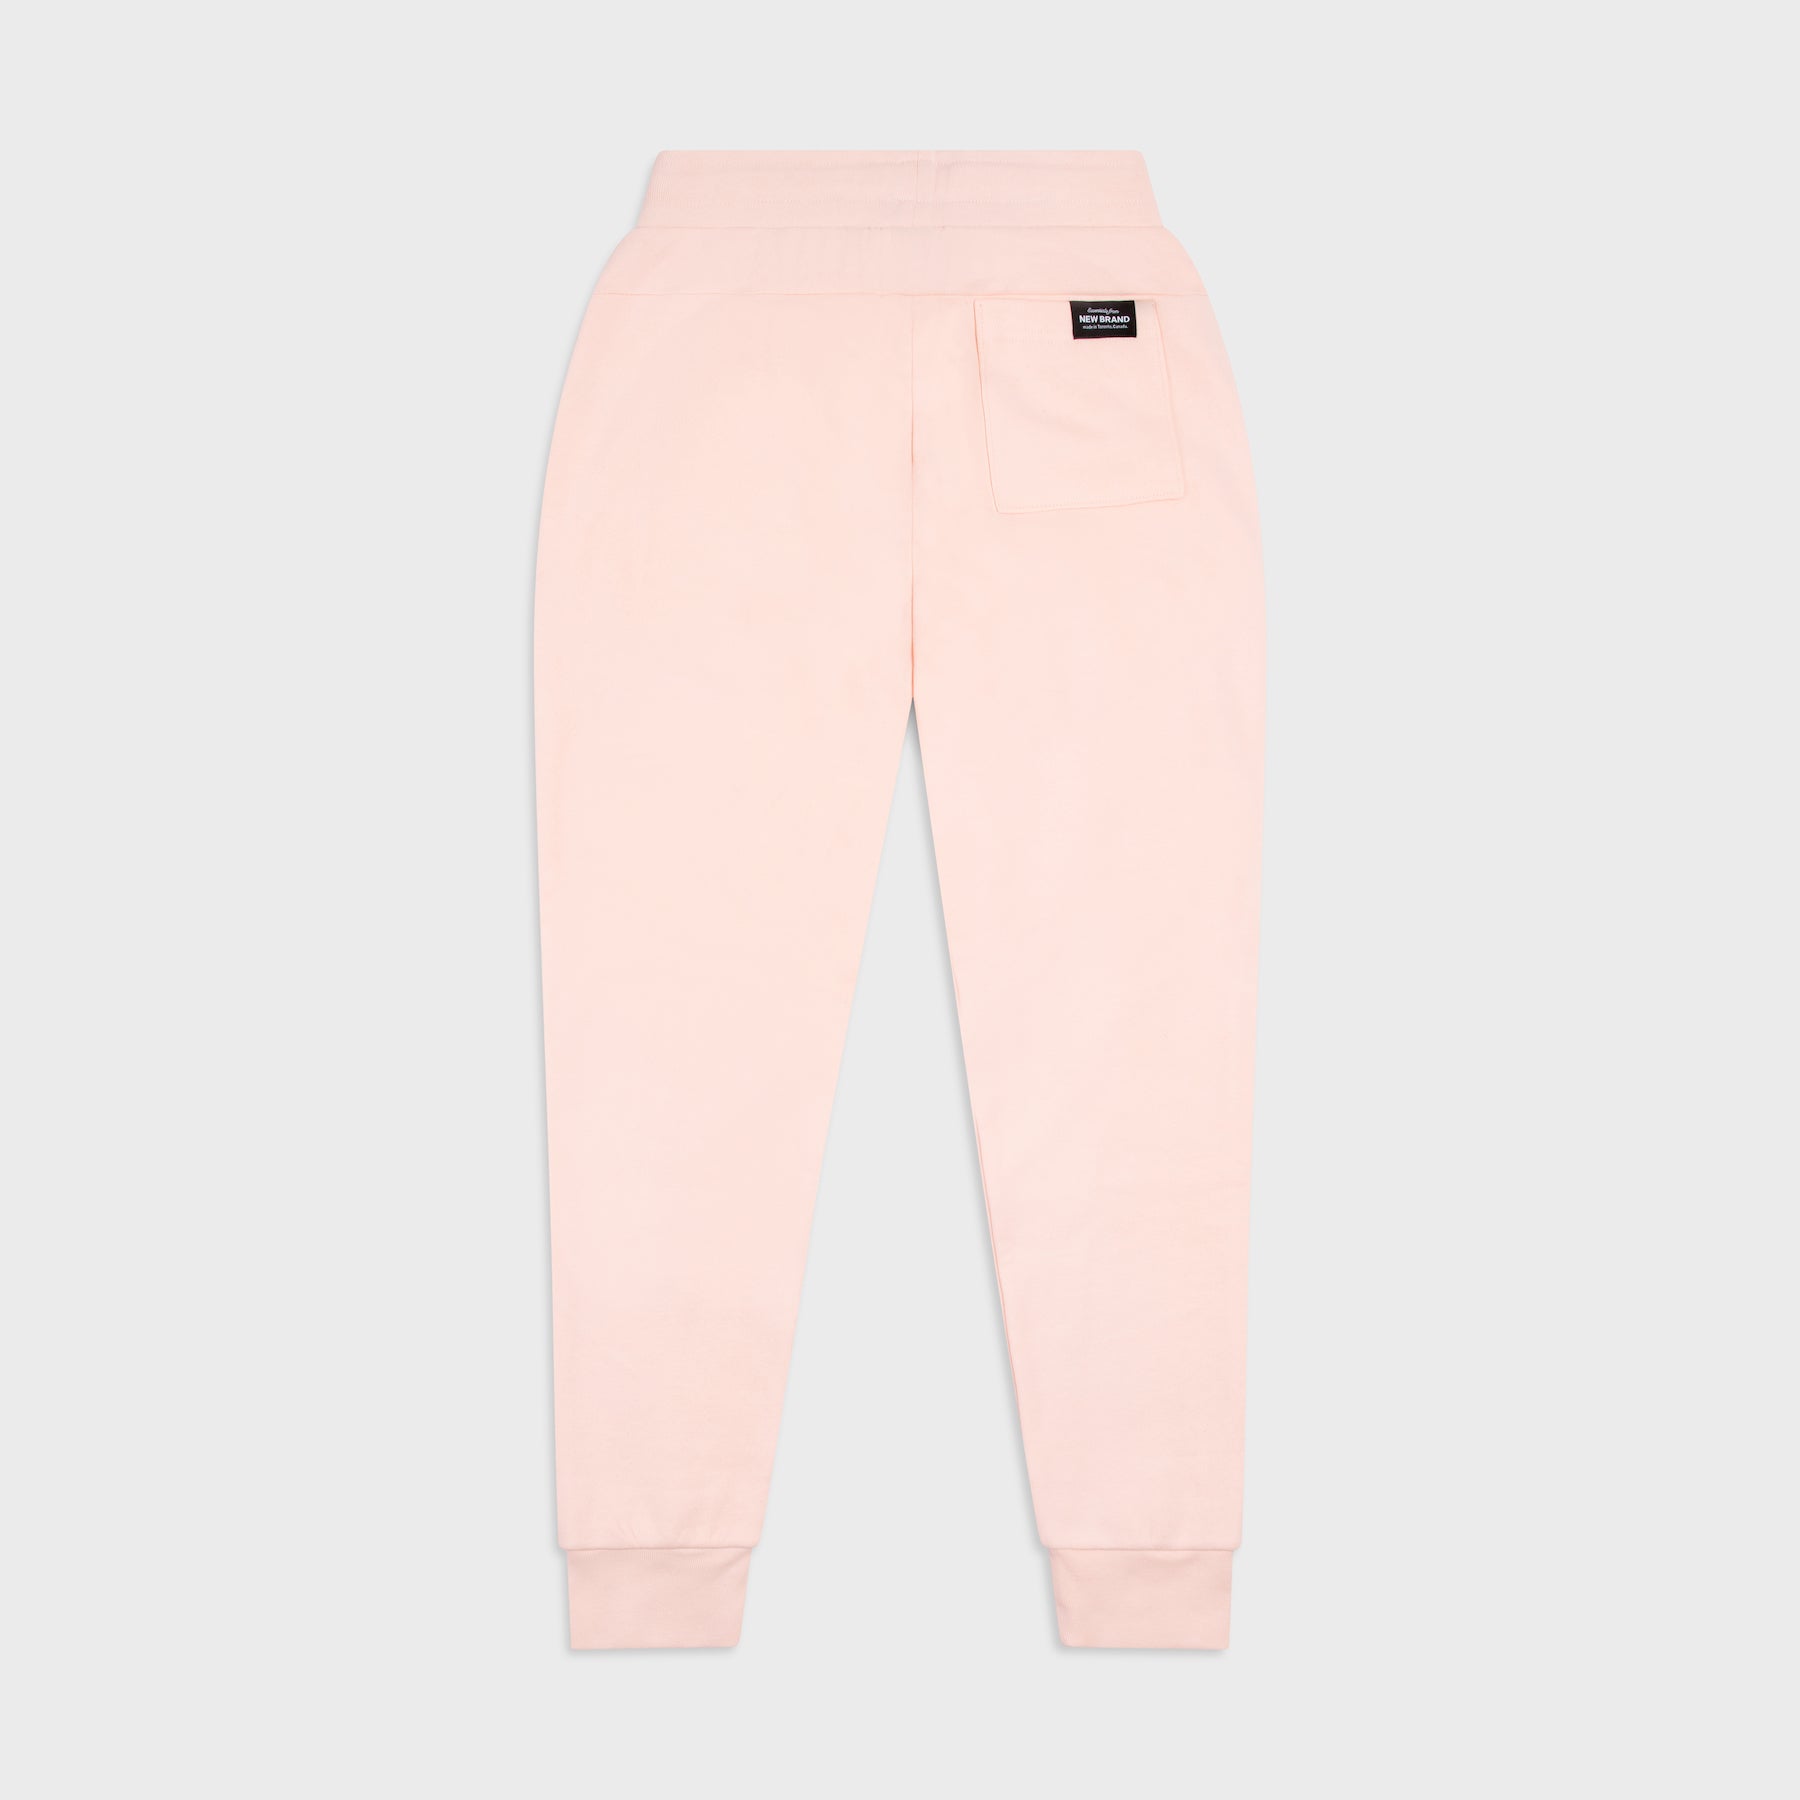 New Brand Joggers - Pale Pink